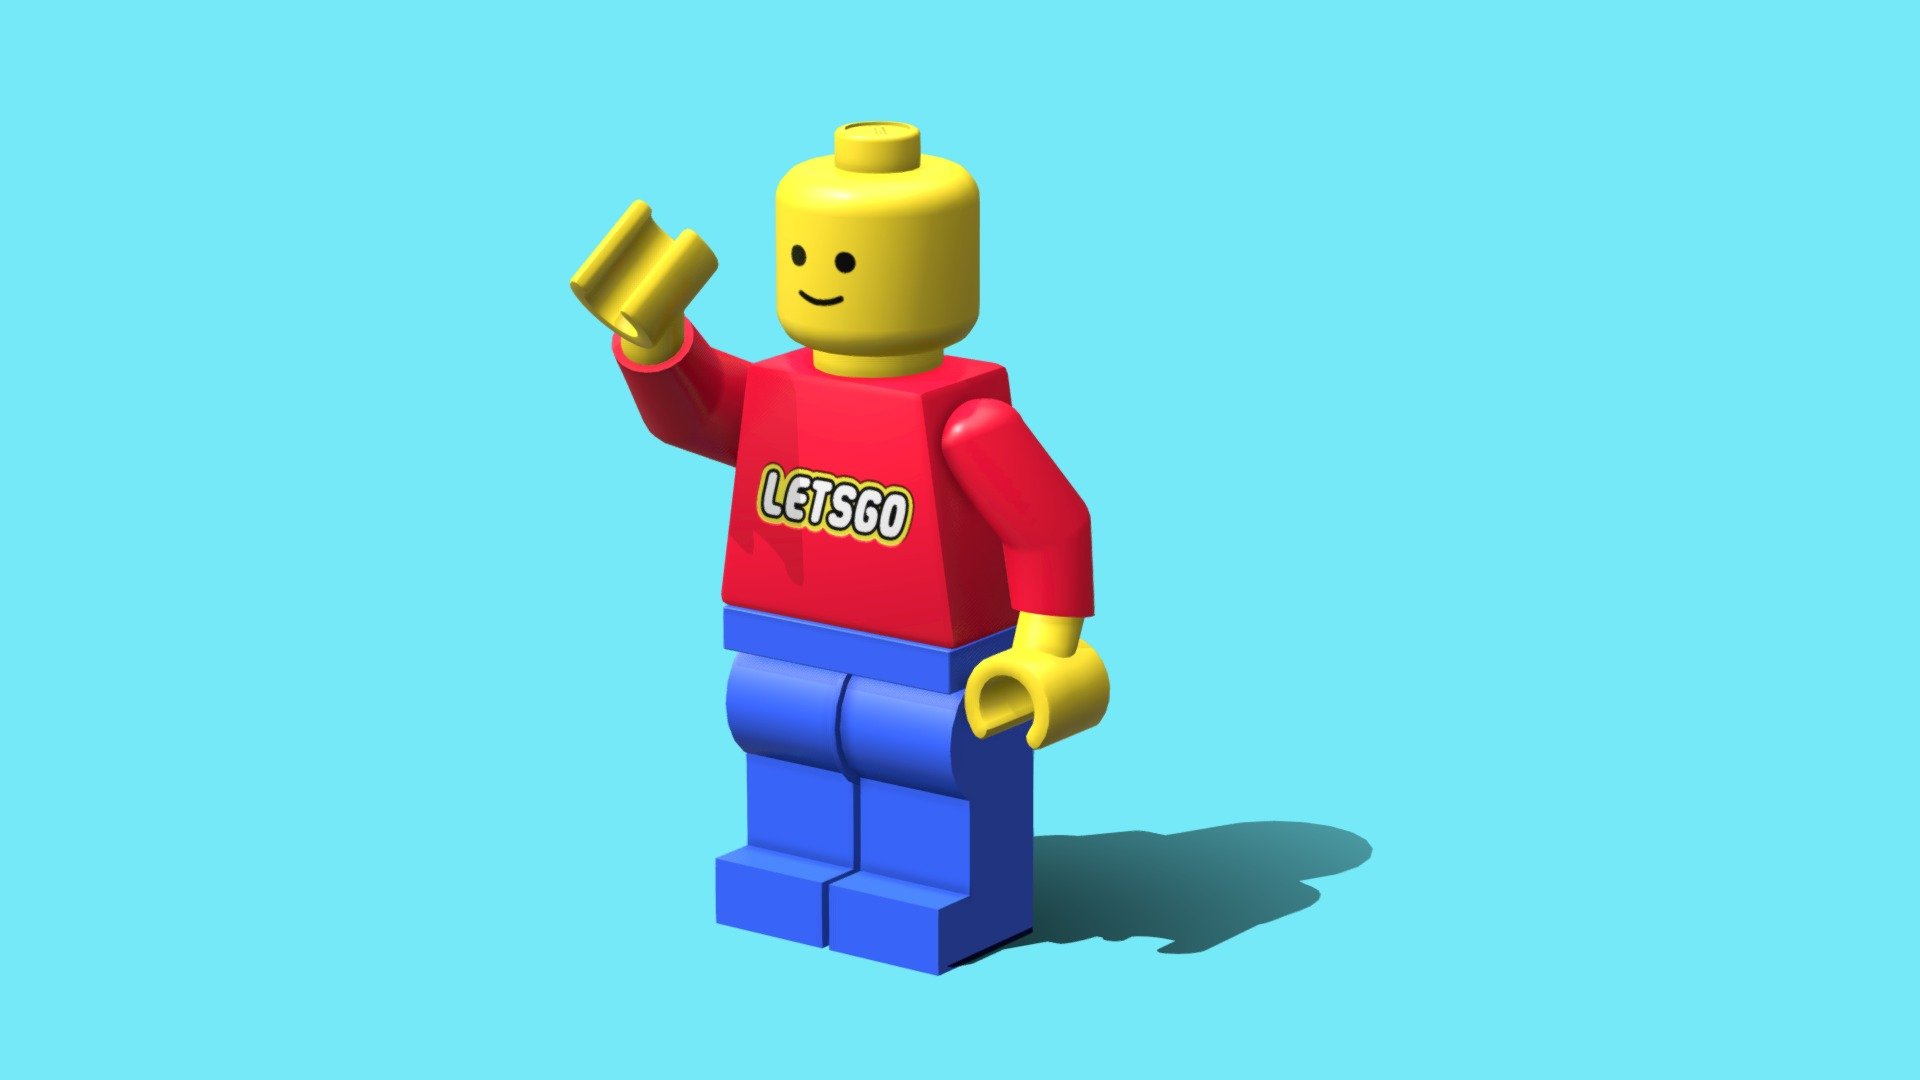 3D Lego man free VR / AR / low-poly 3D model rigged